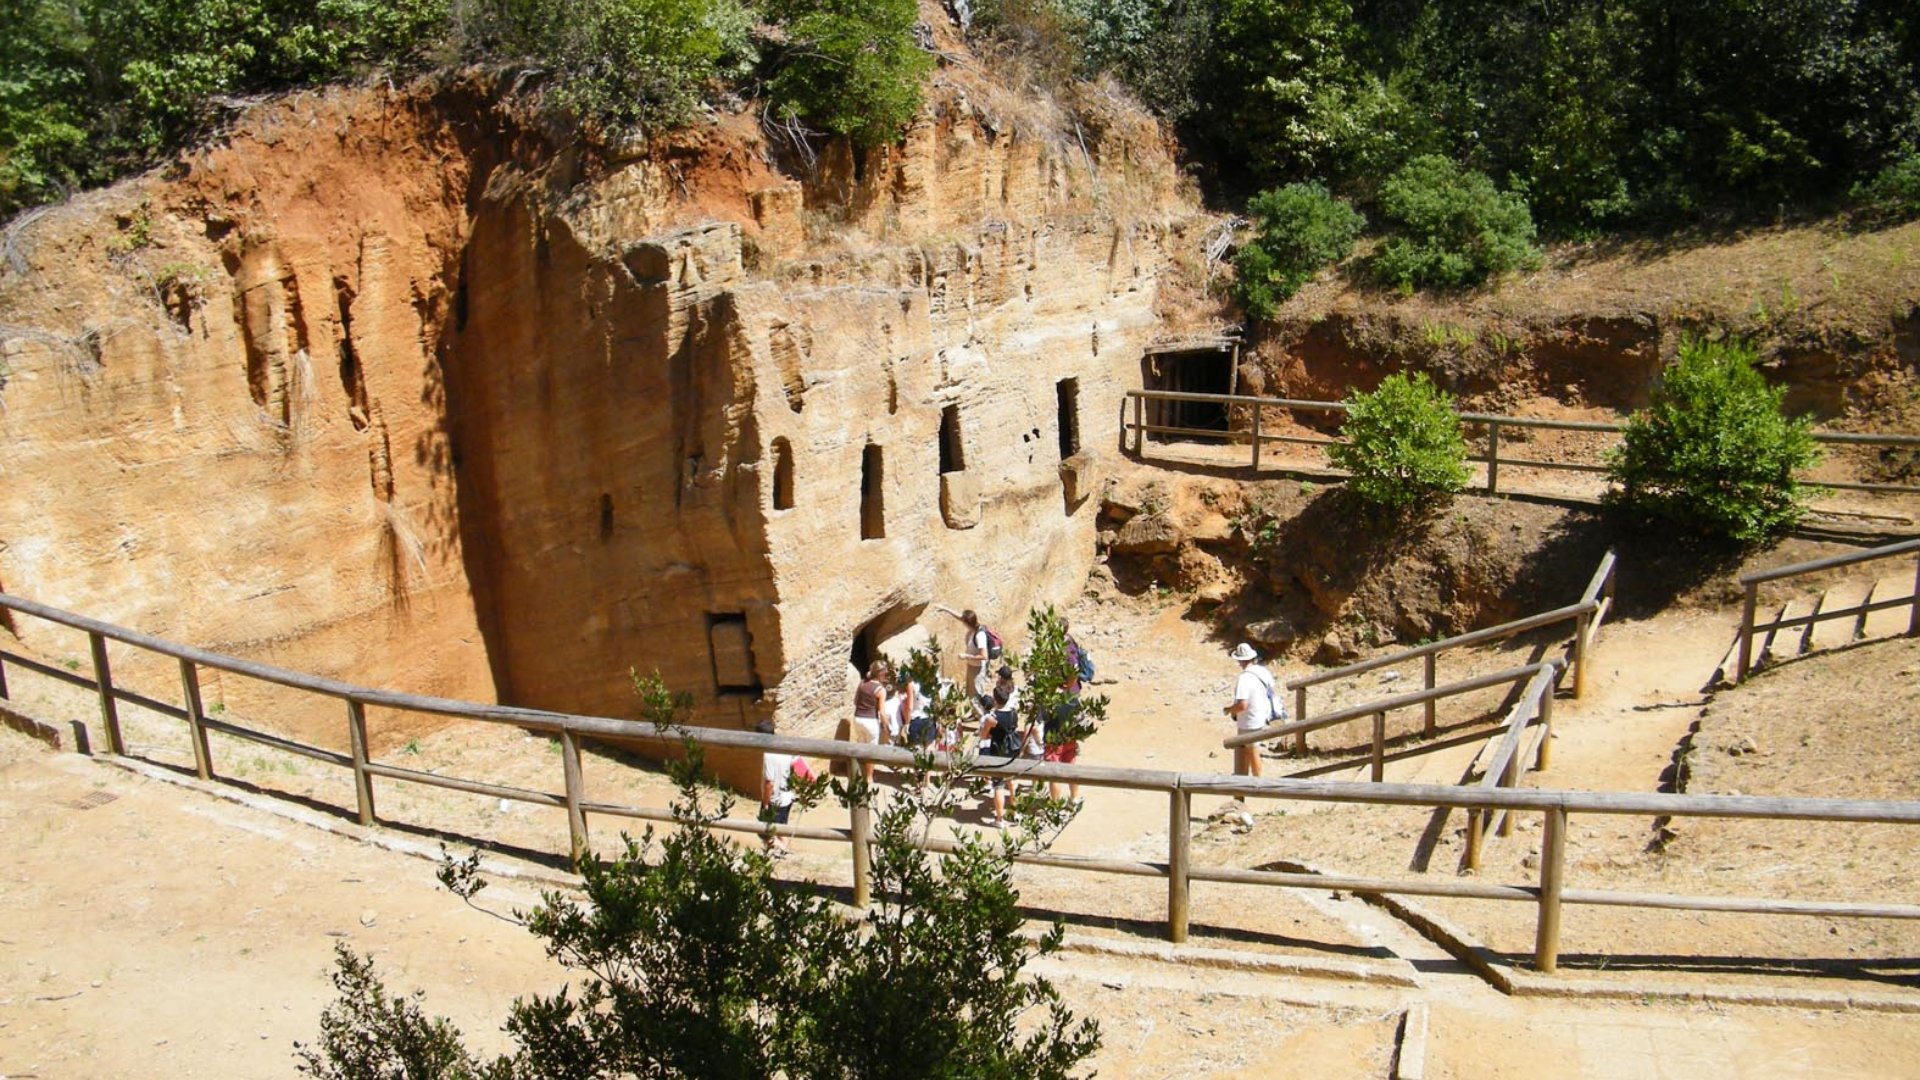 Archeological park of Baratti and Populonia necropolis caves